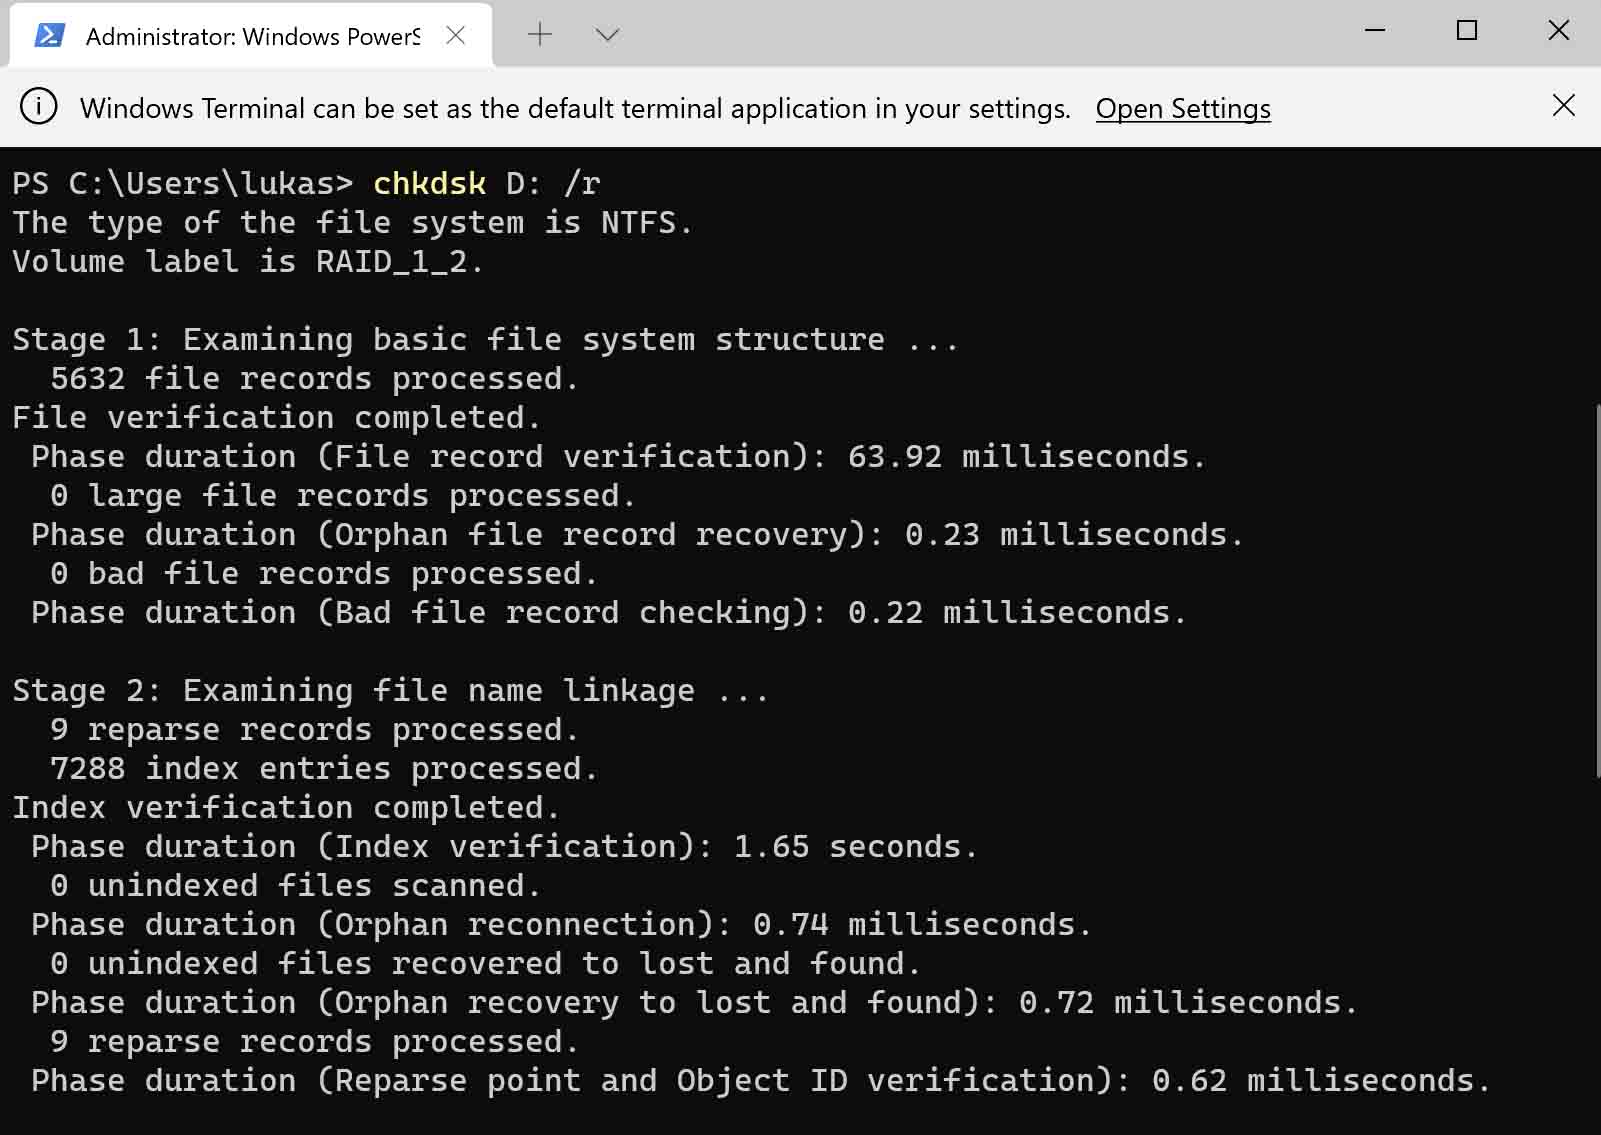 Repair the file system by running CHKDSK